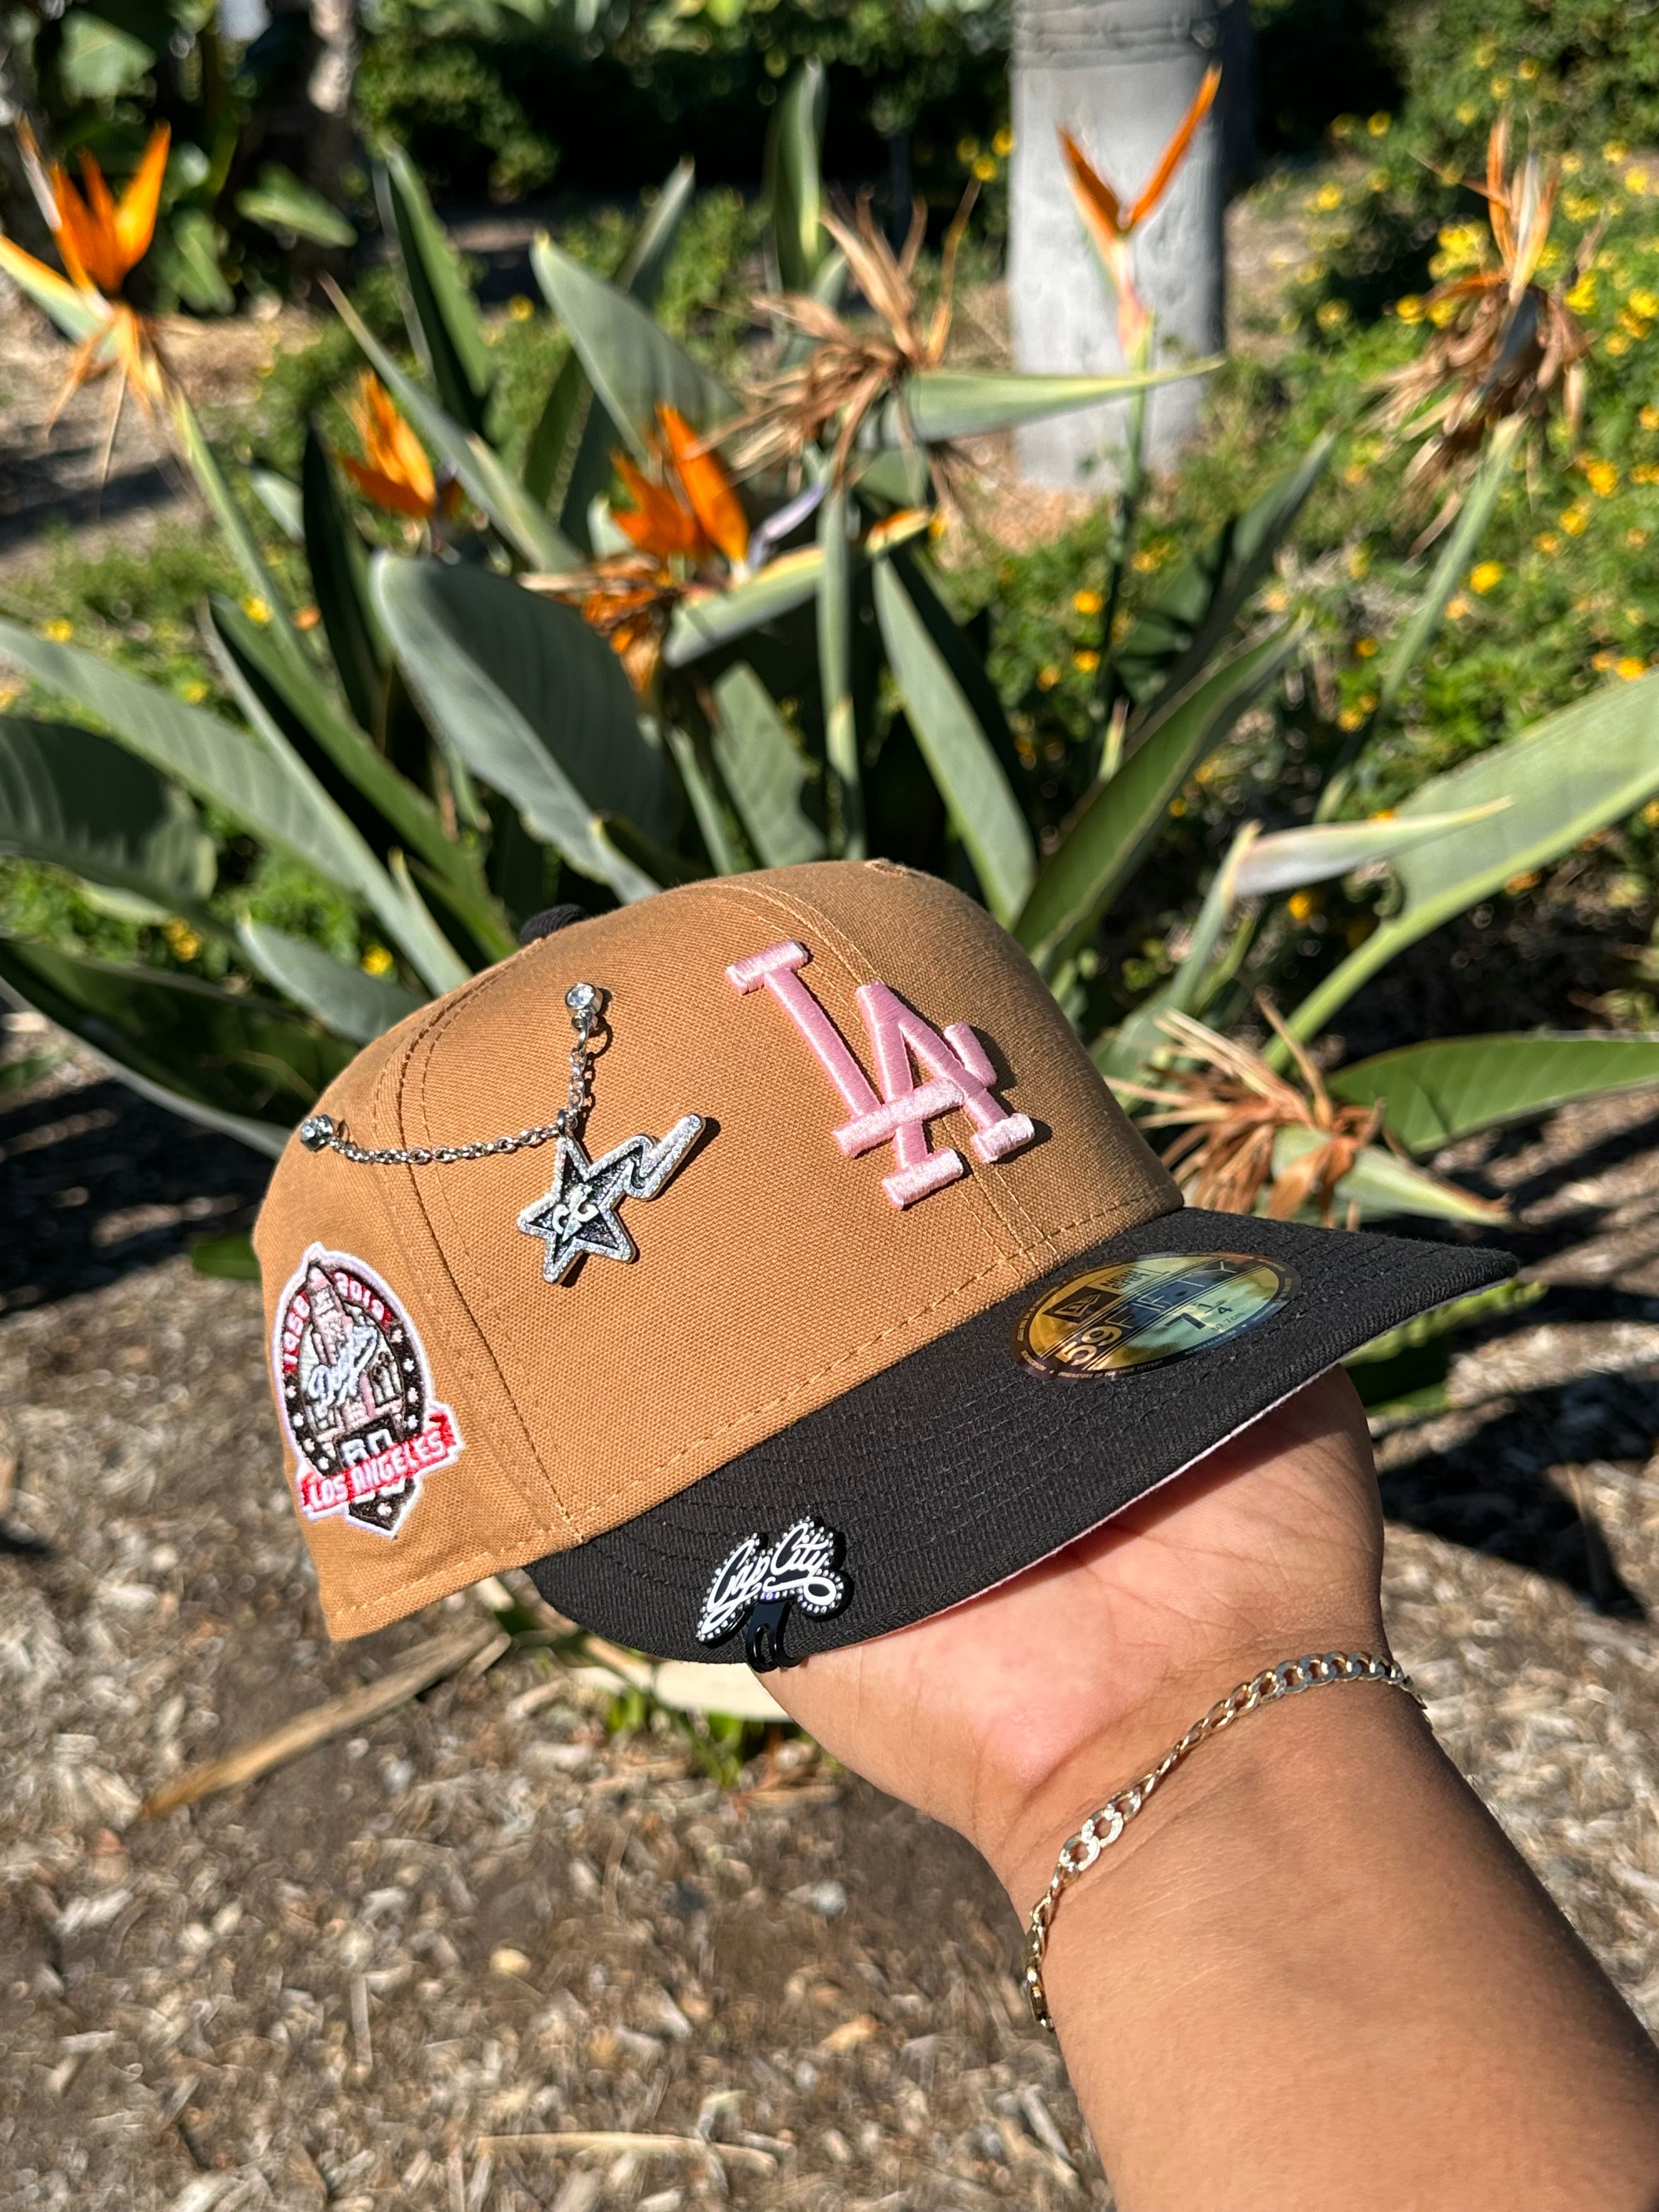 NEW ERA EXCLUSIVE 59FIFTY TAN/BLACK LOS ANGELES DOGERS W/ 60TH ANNIVERSARY PATCH